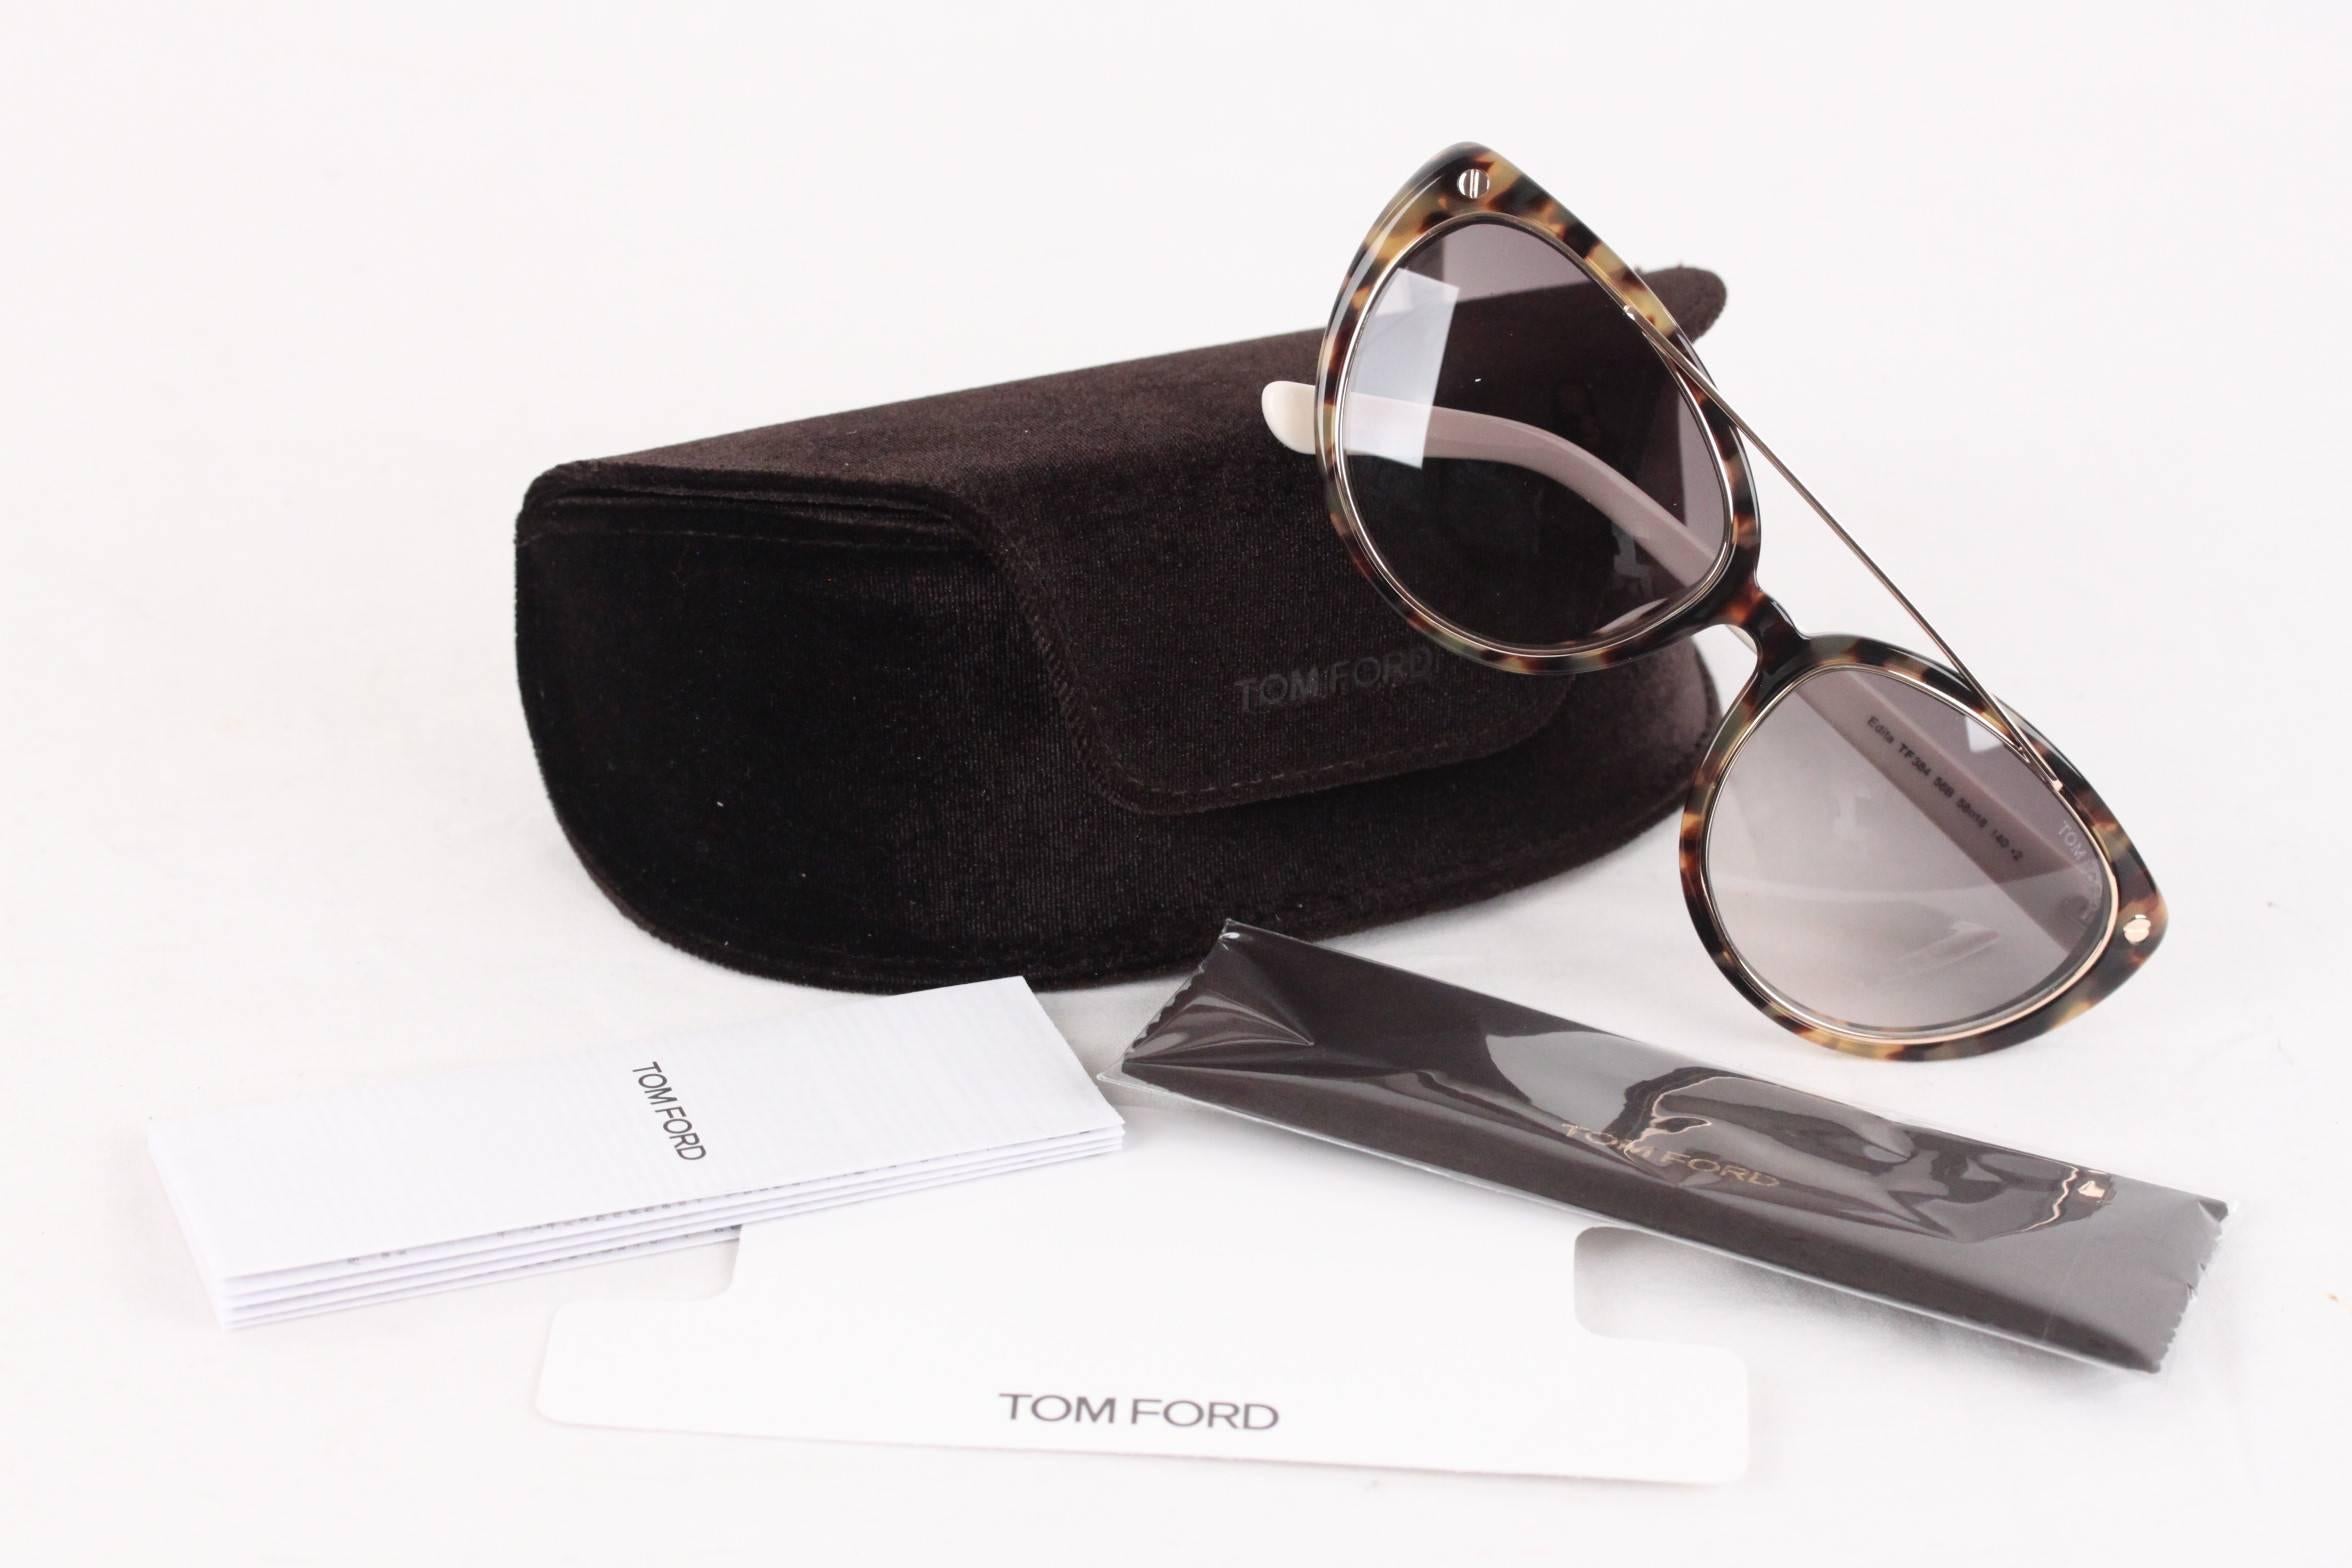 - EDITA TF 384 sunglasses by Tom Ford
- Cat-eye shape with brow bar
- Signature 'T' inset at temples.
- Gradient Smoke (grey) CR-39 lenses. 100% UV protection.
- Made in Italy
- Serial & ref. numbers printed internally
- Retail price is $